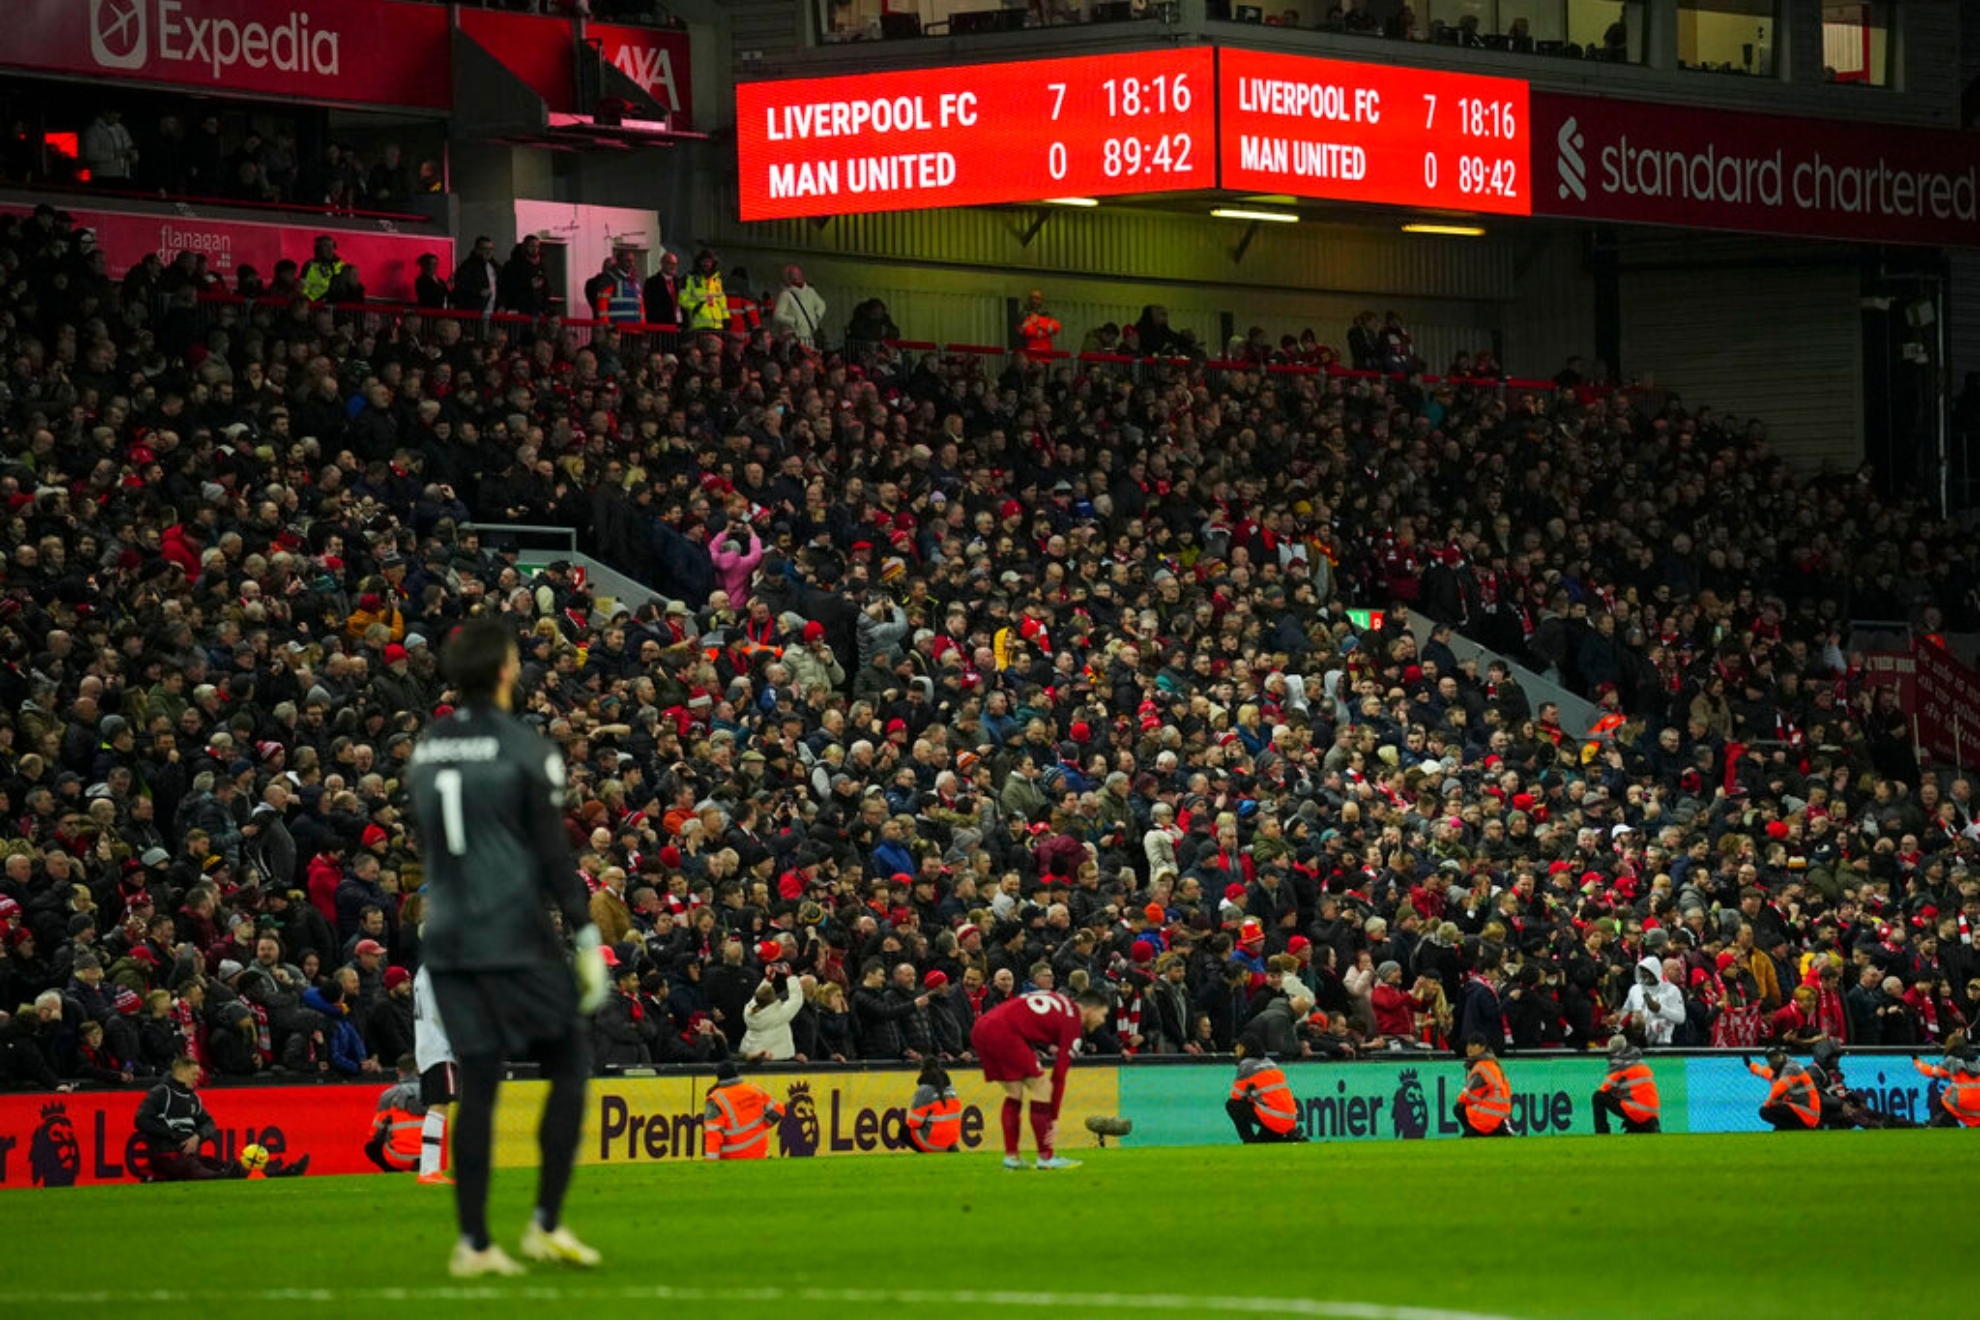 Liverpool secured the biggest win in the history of England's biggest rivalry